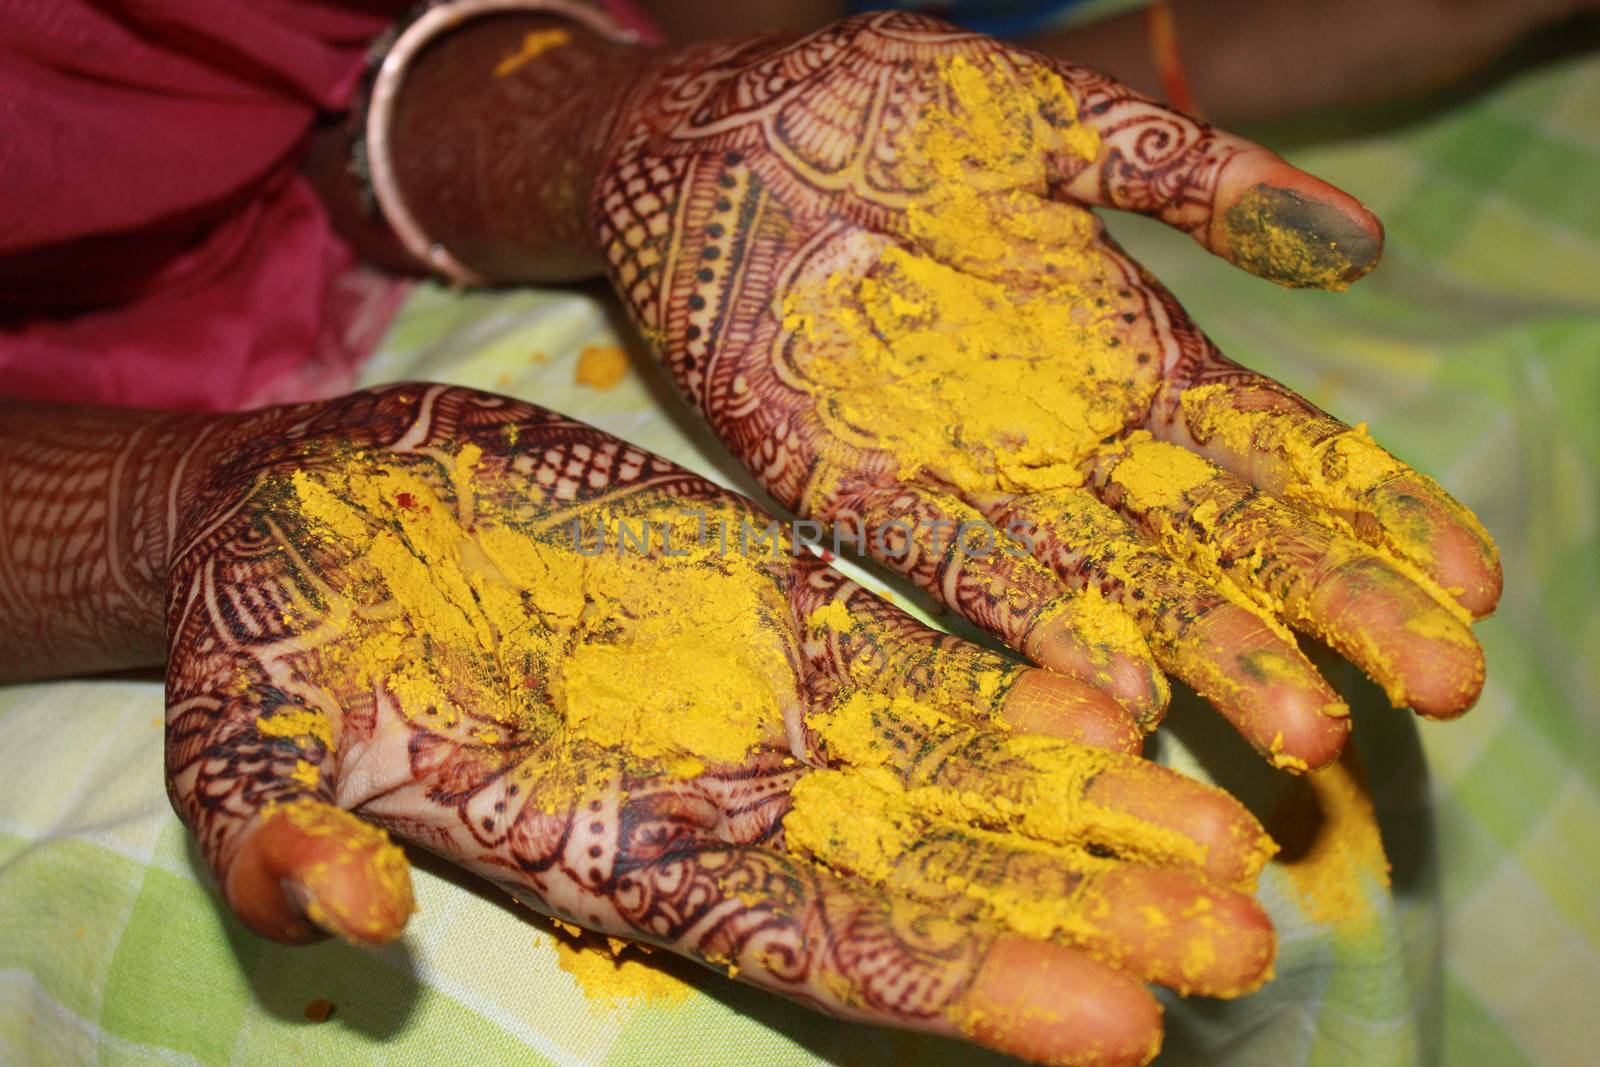 A view of hands with mehendi having turmeric / haldi on their hands as a part of a traditional wedding ritual in India.